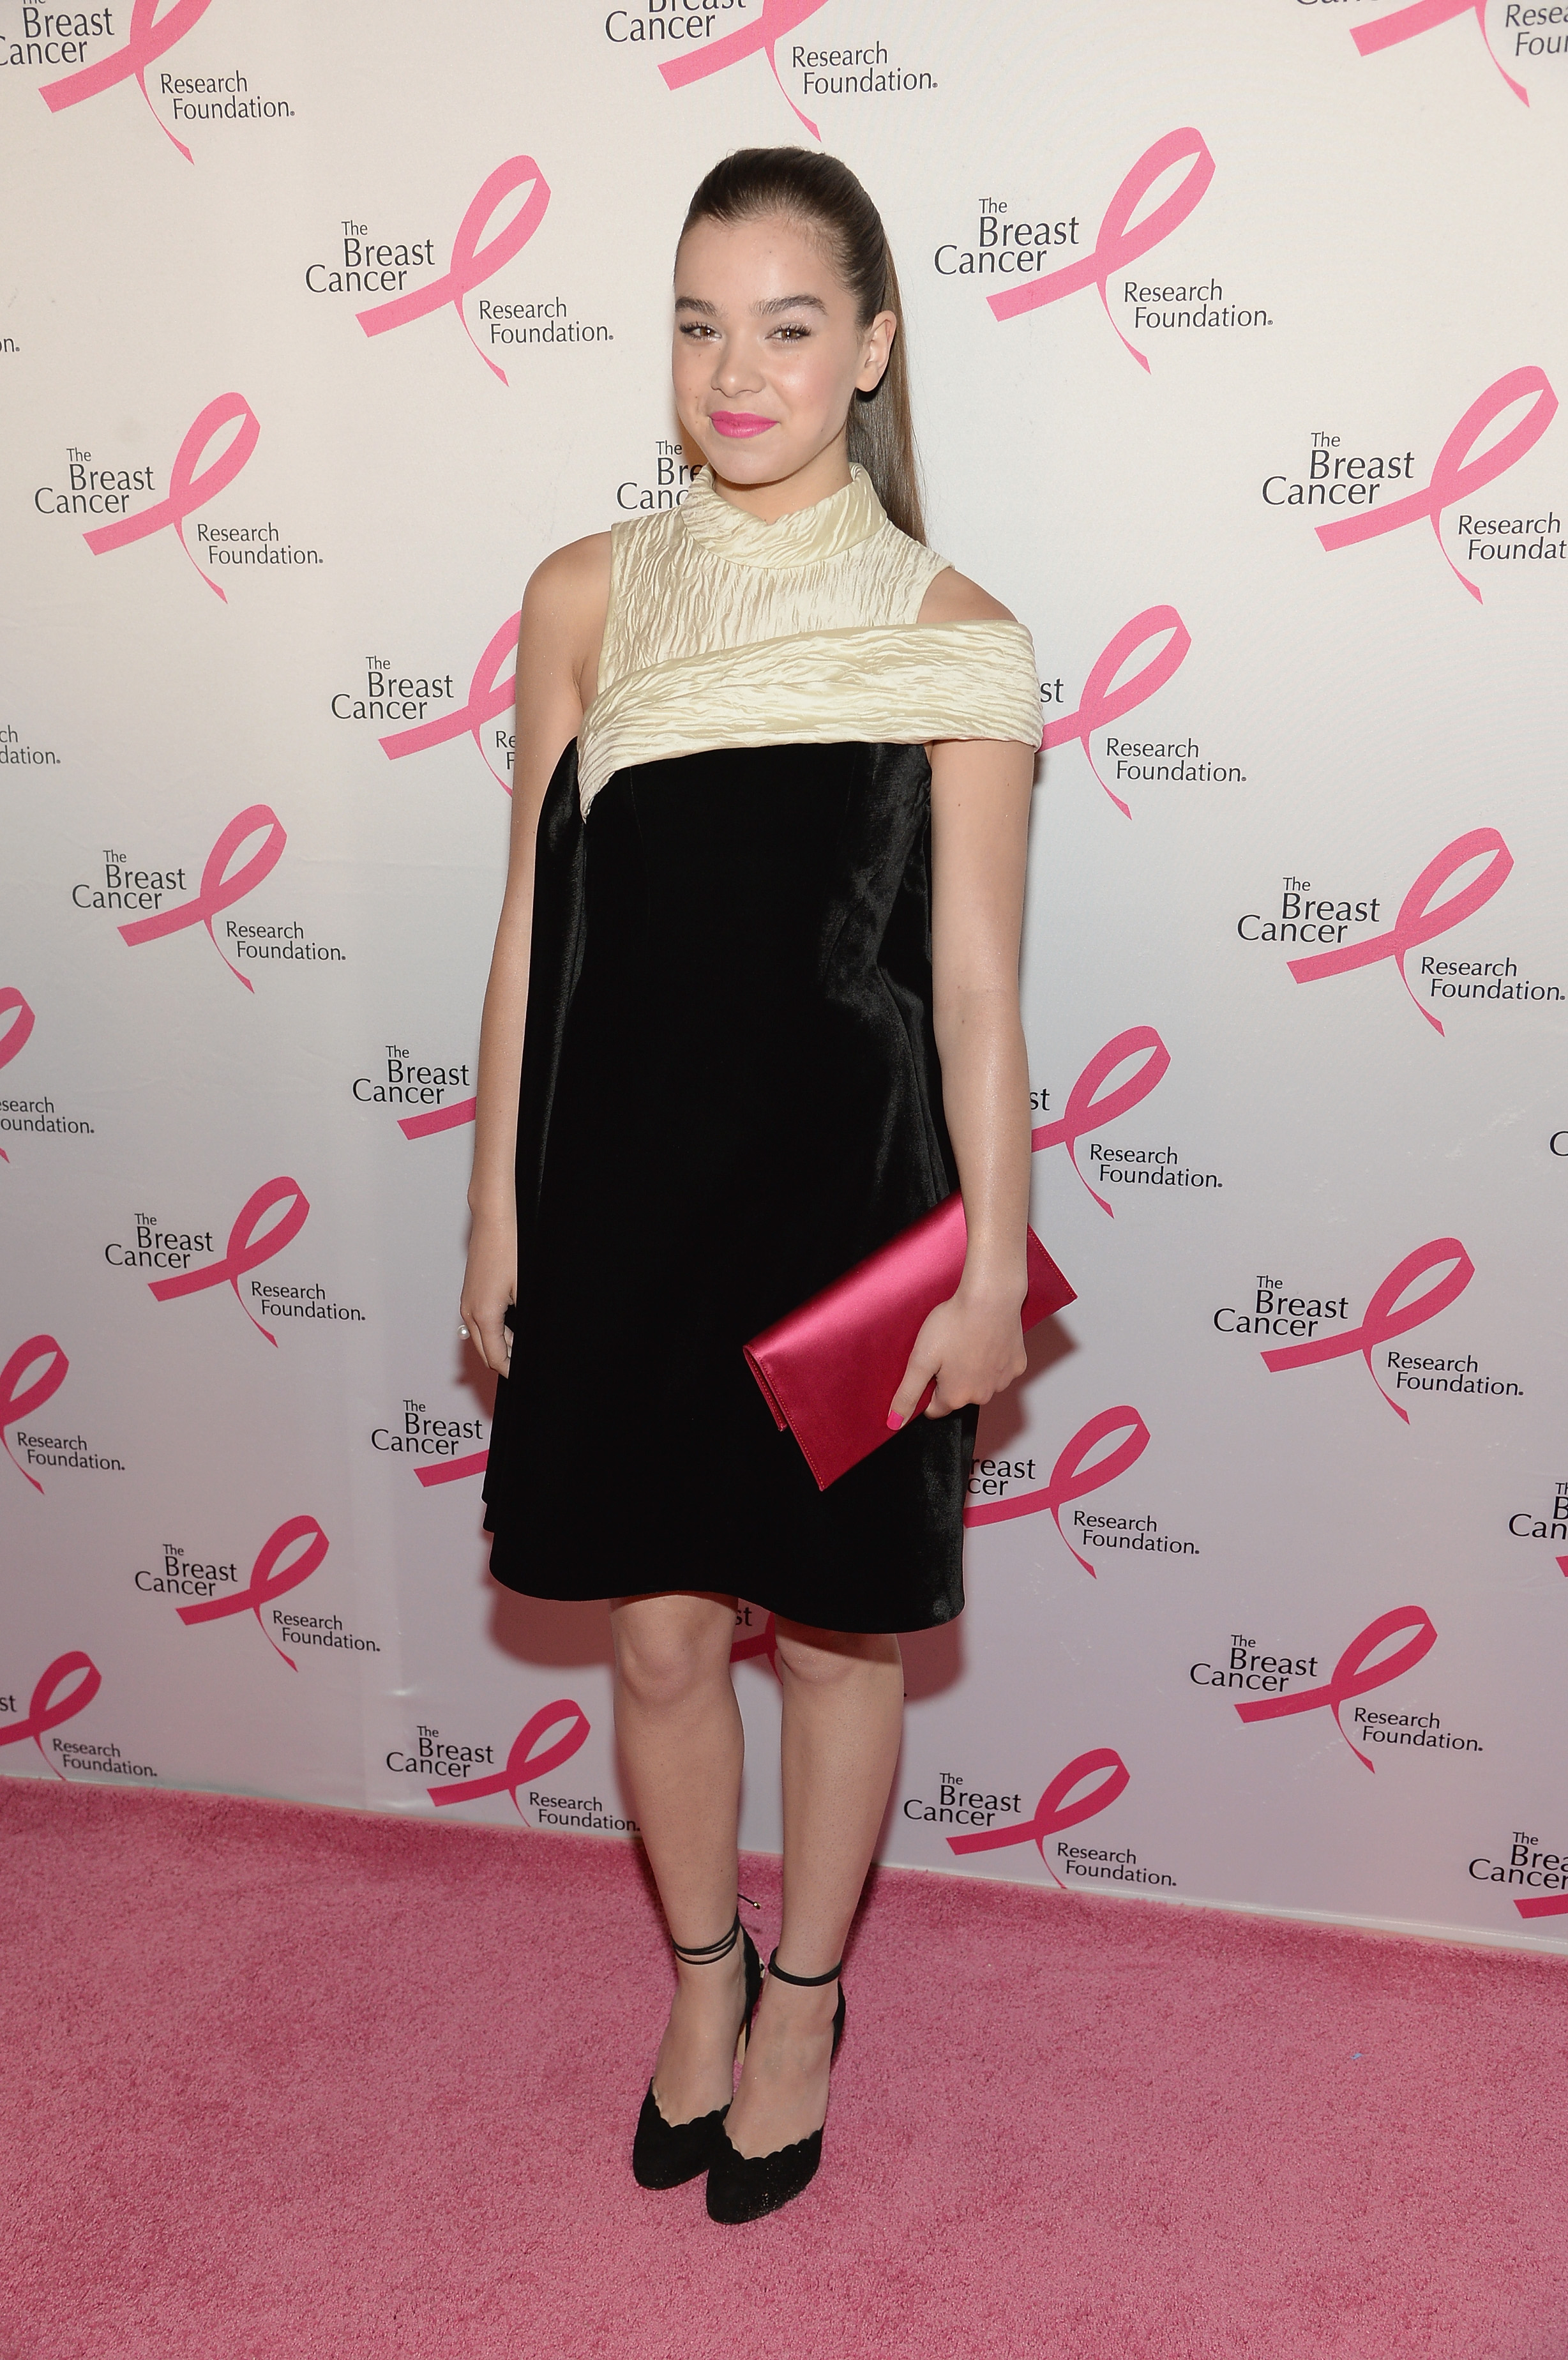 The Breast Cancer Research Foundation's 2014 Hot Pink Party - Red Carpet